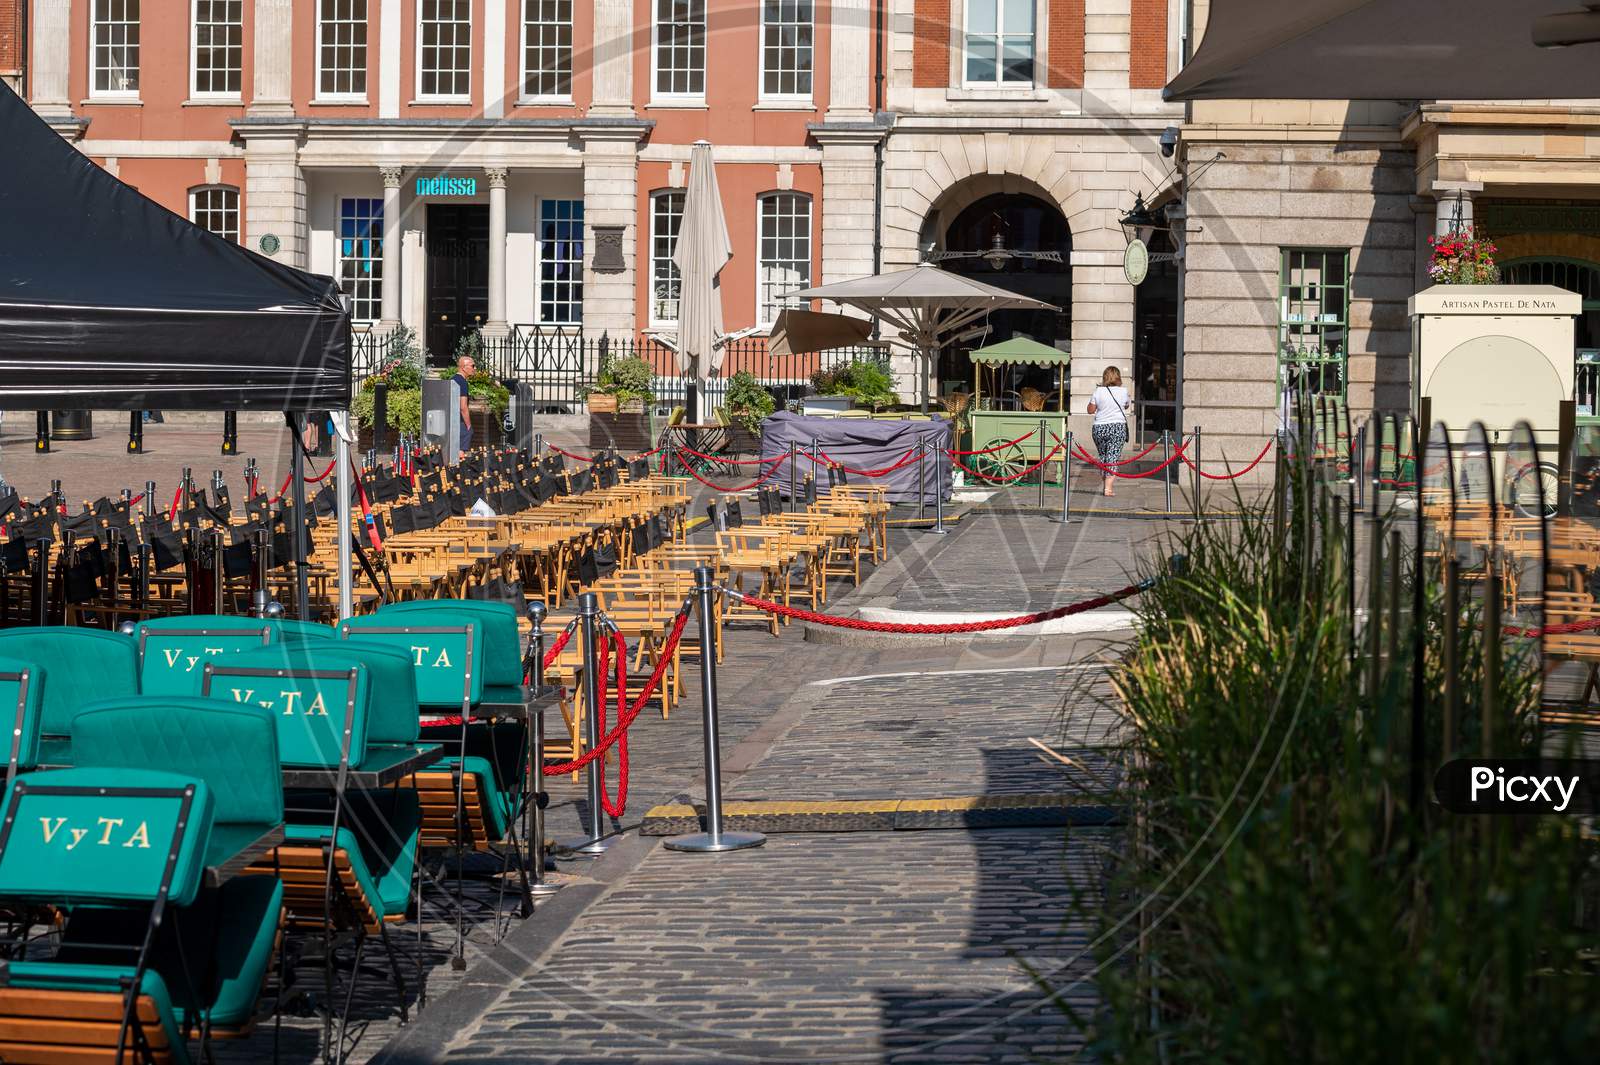 Empty Seating At An Outdoor Entertainment Area In Covent Garden During Covid 19 Pandemic